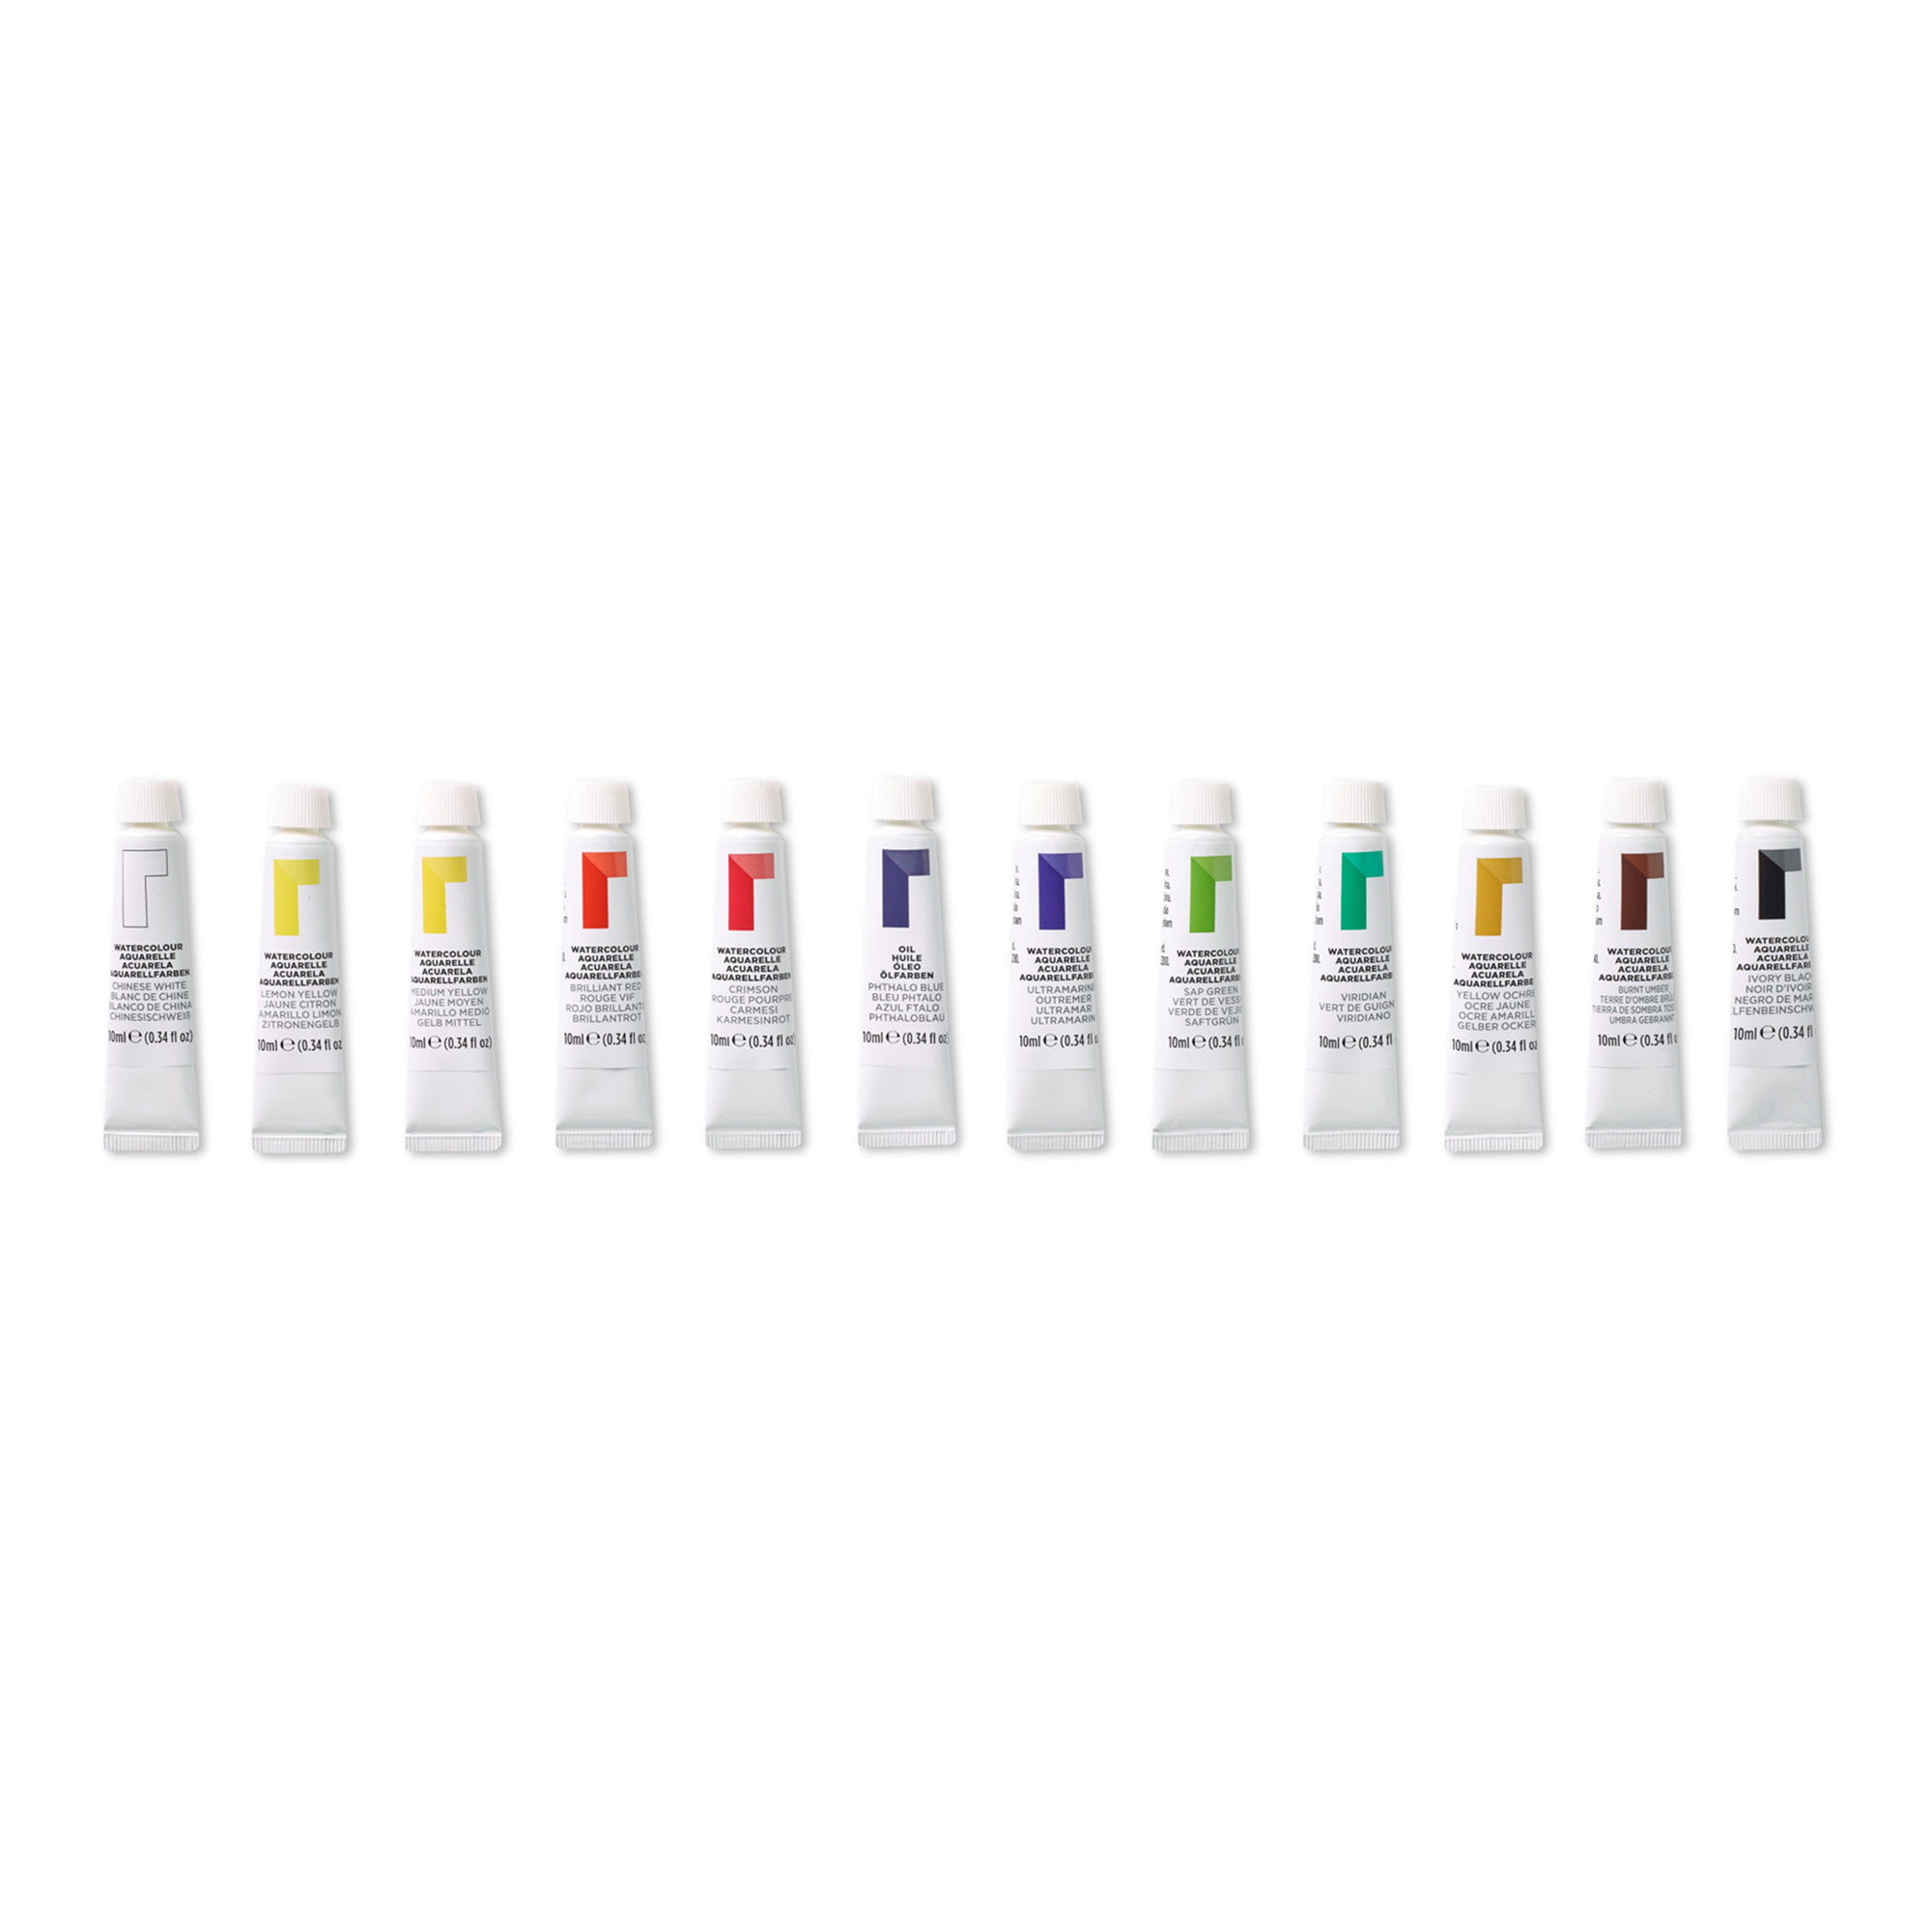 Reeves Gouache Color Sets, 24-Color 10ml Set – innovationssa